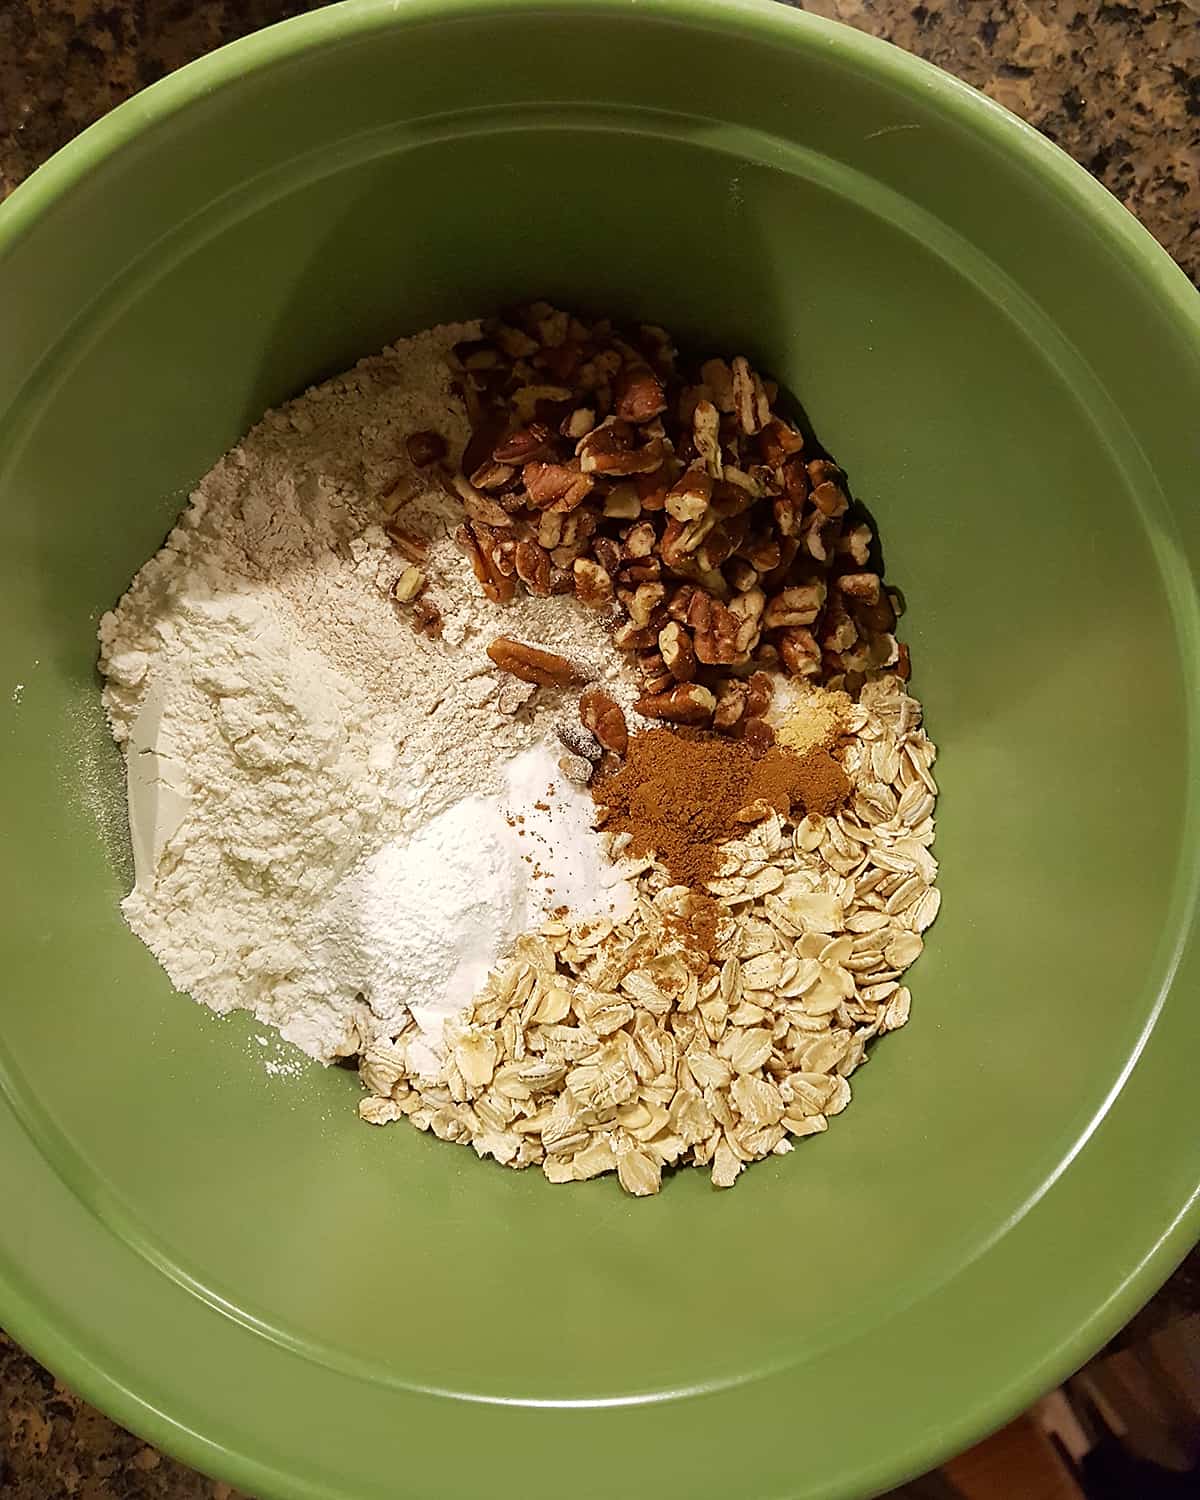 Medium bowl containing dry ingredients for the recipe.